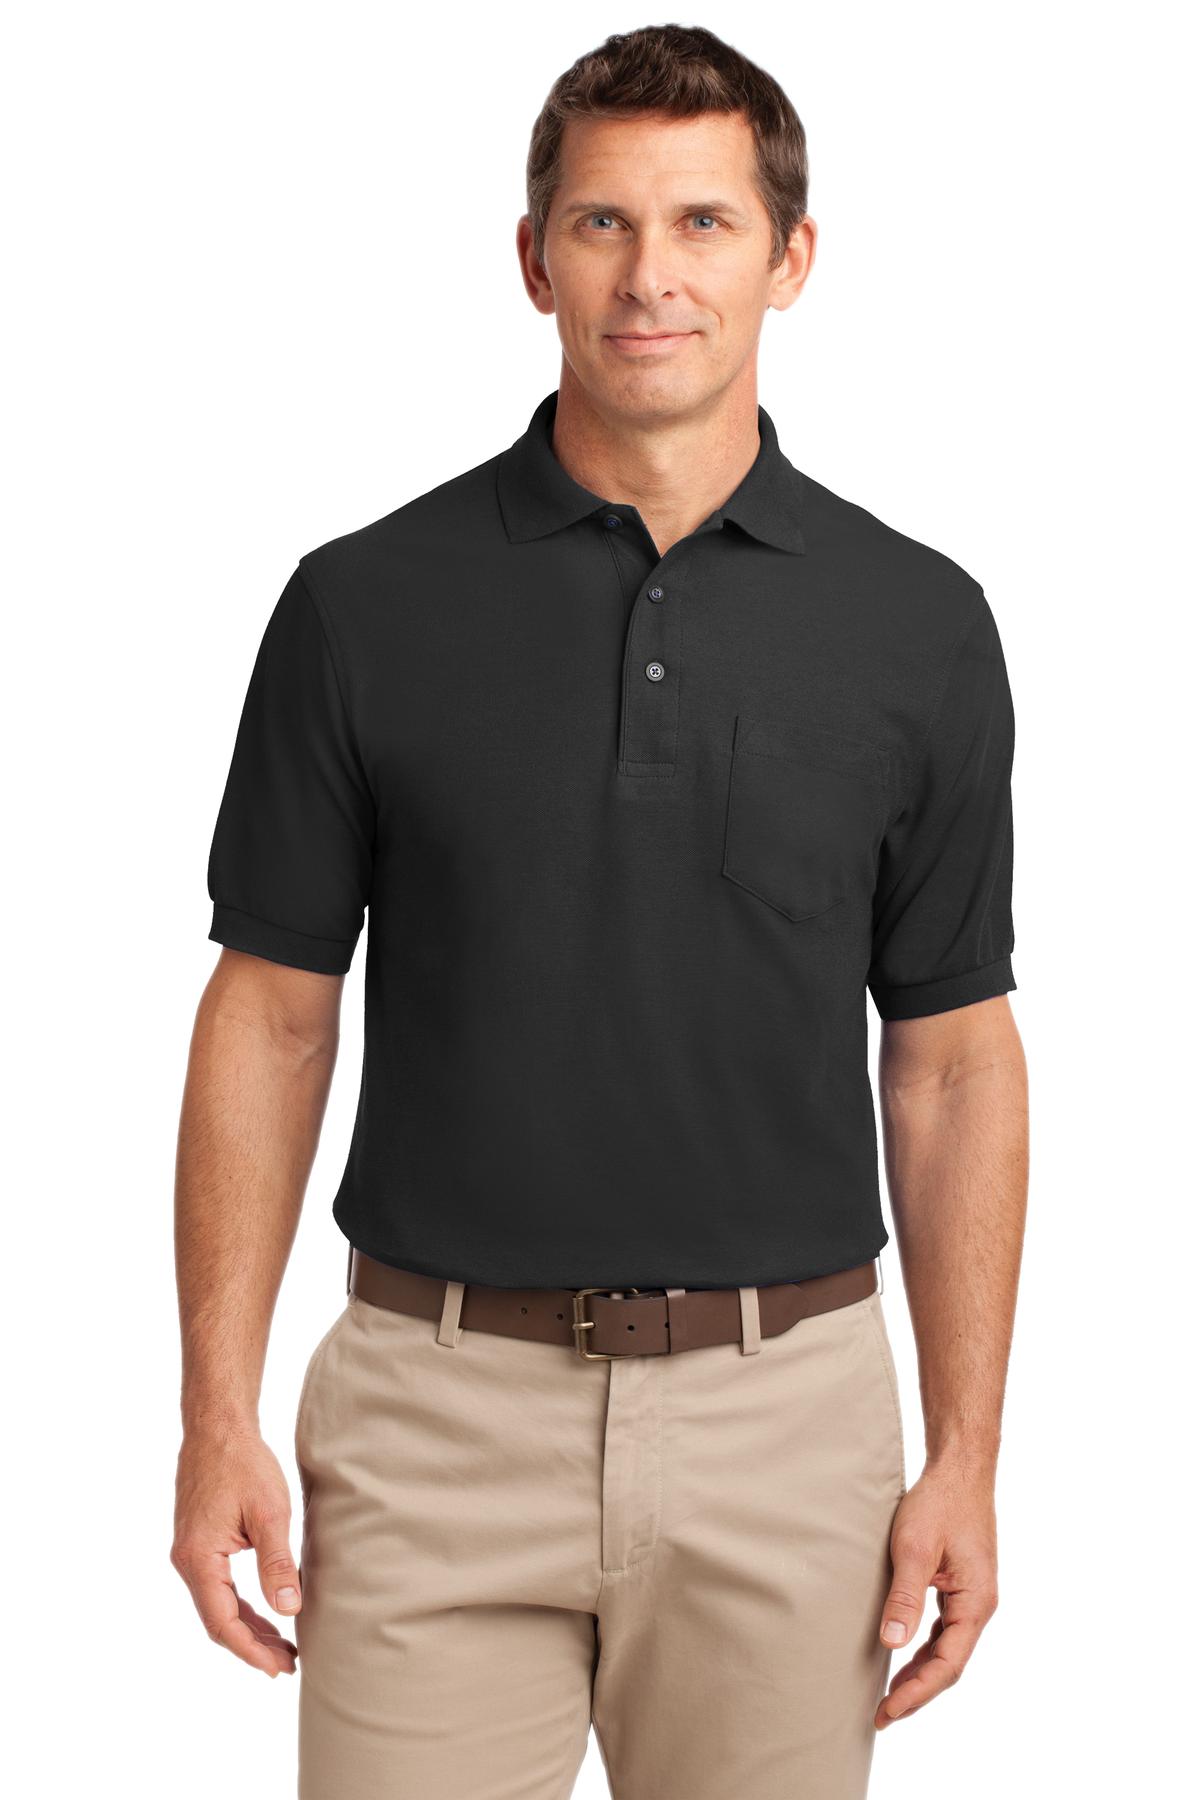 Port Authority Hospitality Tall Polos&Knits ® Tall Silk Touch Polo with Pocket.-Port Authority